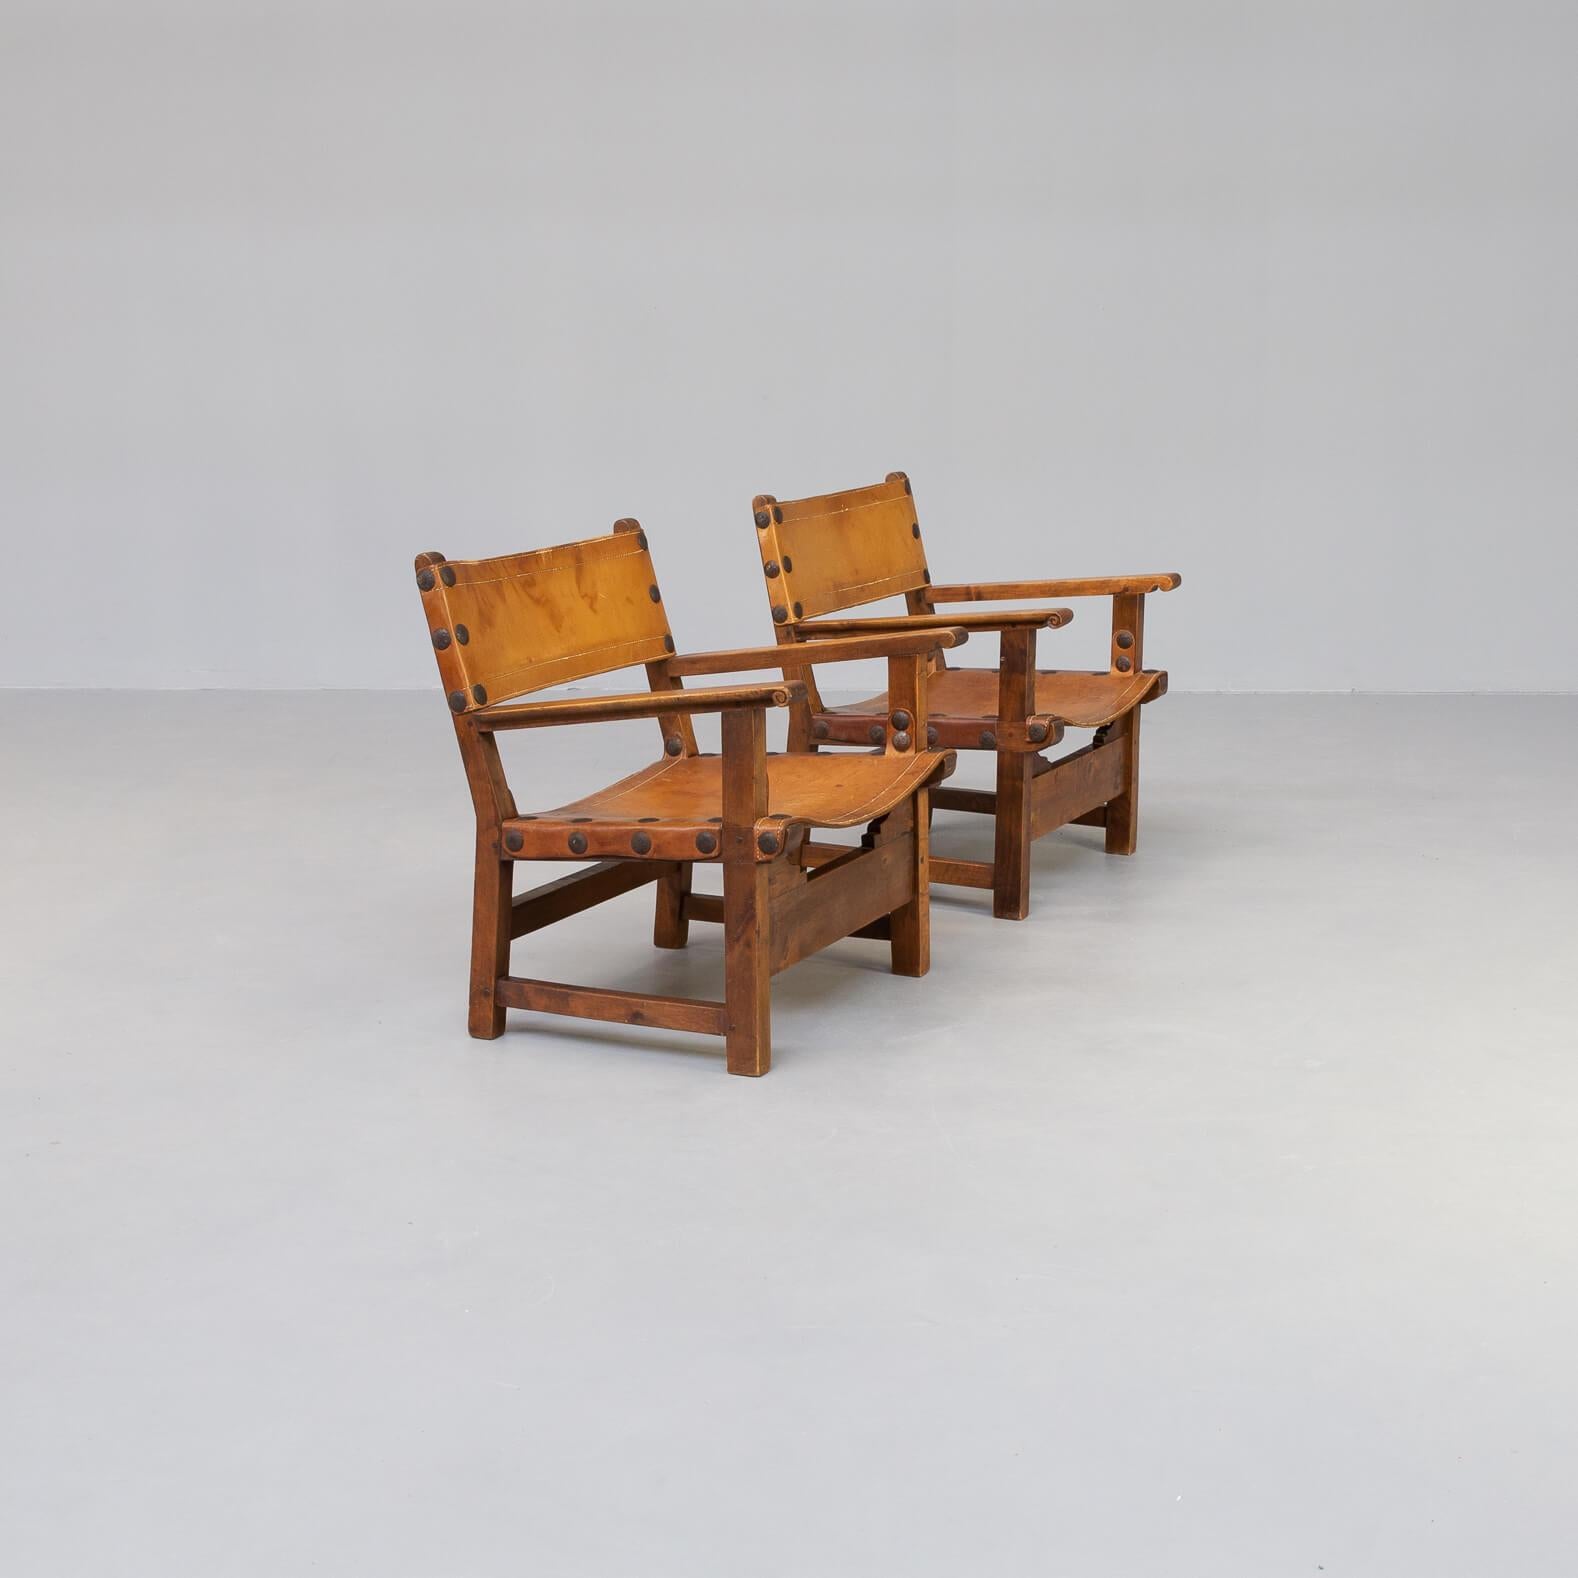 50s Oak Brutalist Spanish Chair with Saddle Leather For Sale 1